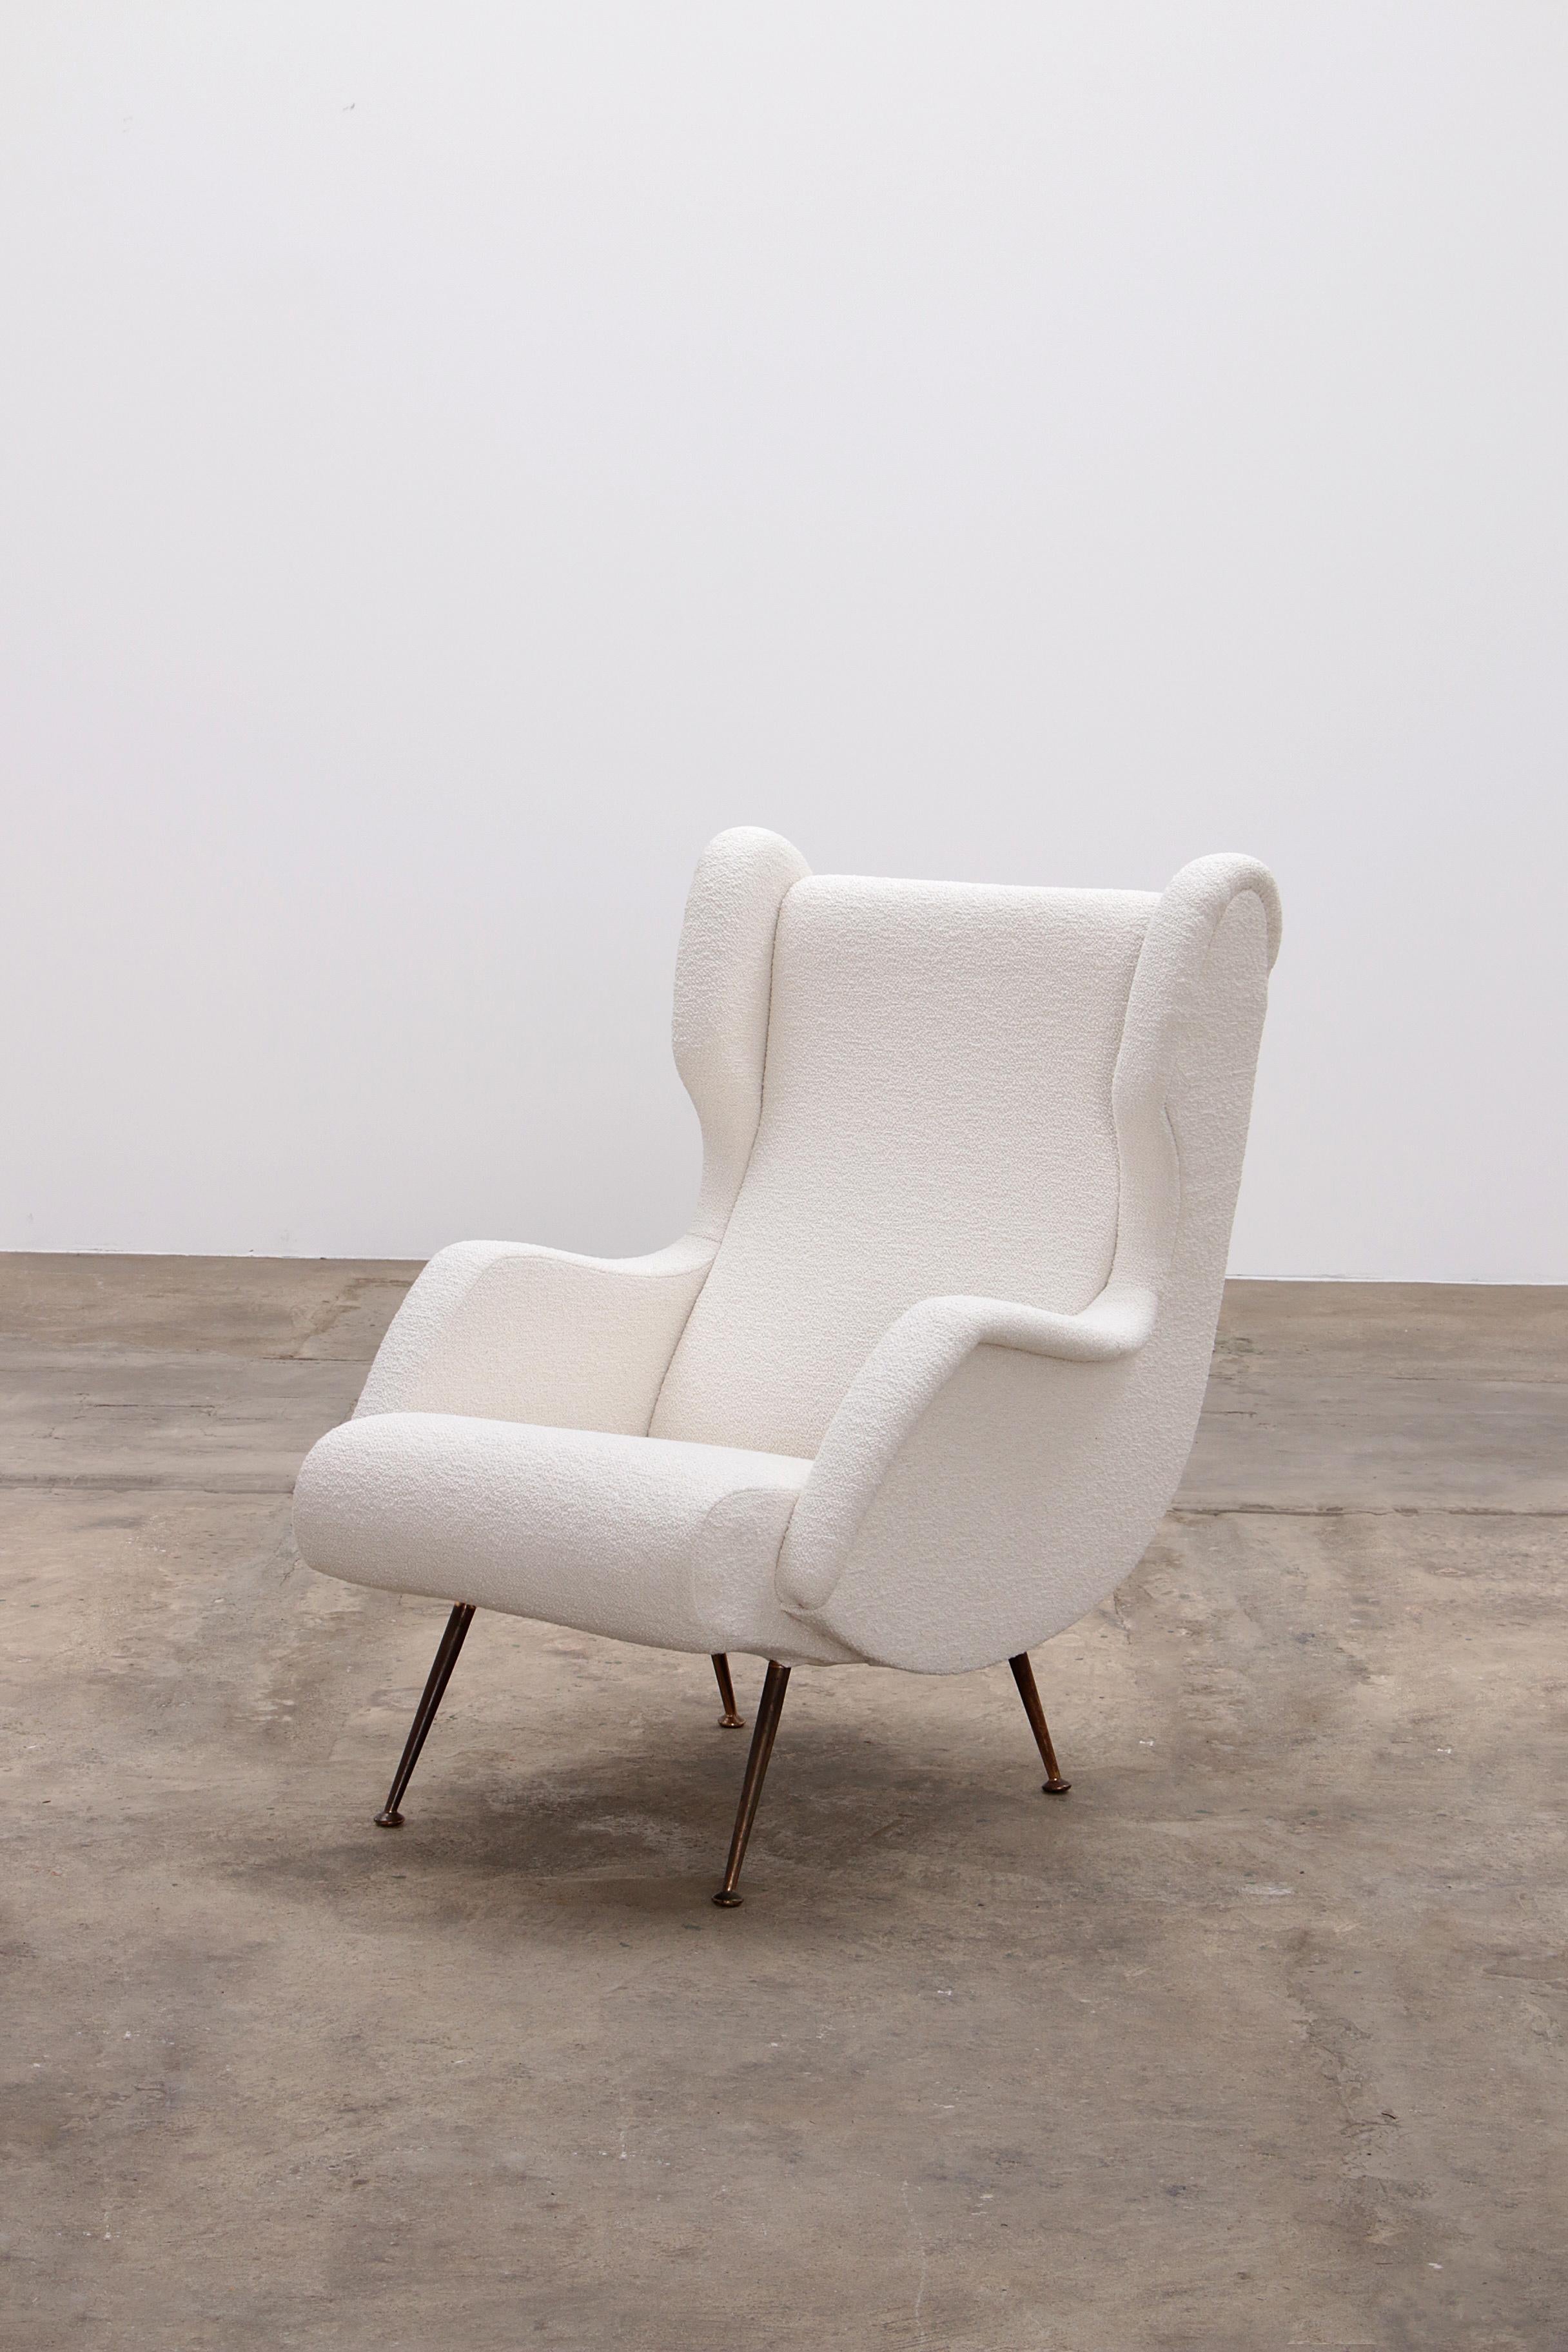 Italian Armchair by Marco Zanuso for Arflex upholstered with Boucle, 1960

Very rare chair designed by Marco Zanuso for Arflex in the 1950s. This lounge chair is very comfortable and classically elegant. This chair has been completely restored and